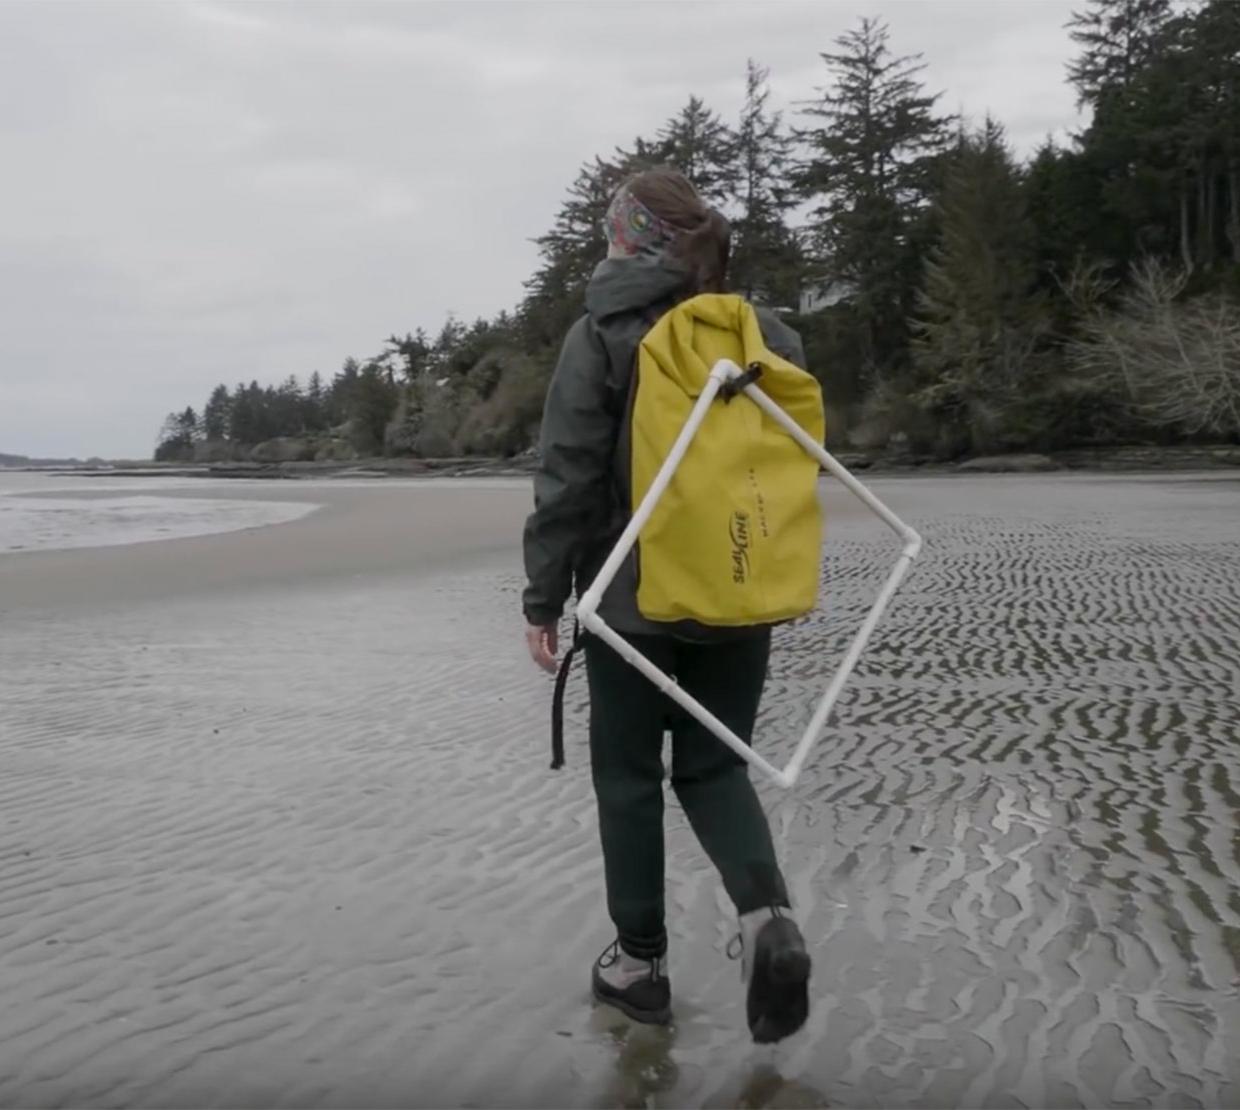 marine researcher walking on cloudy beach carrying hiking and research gear